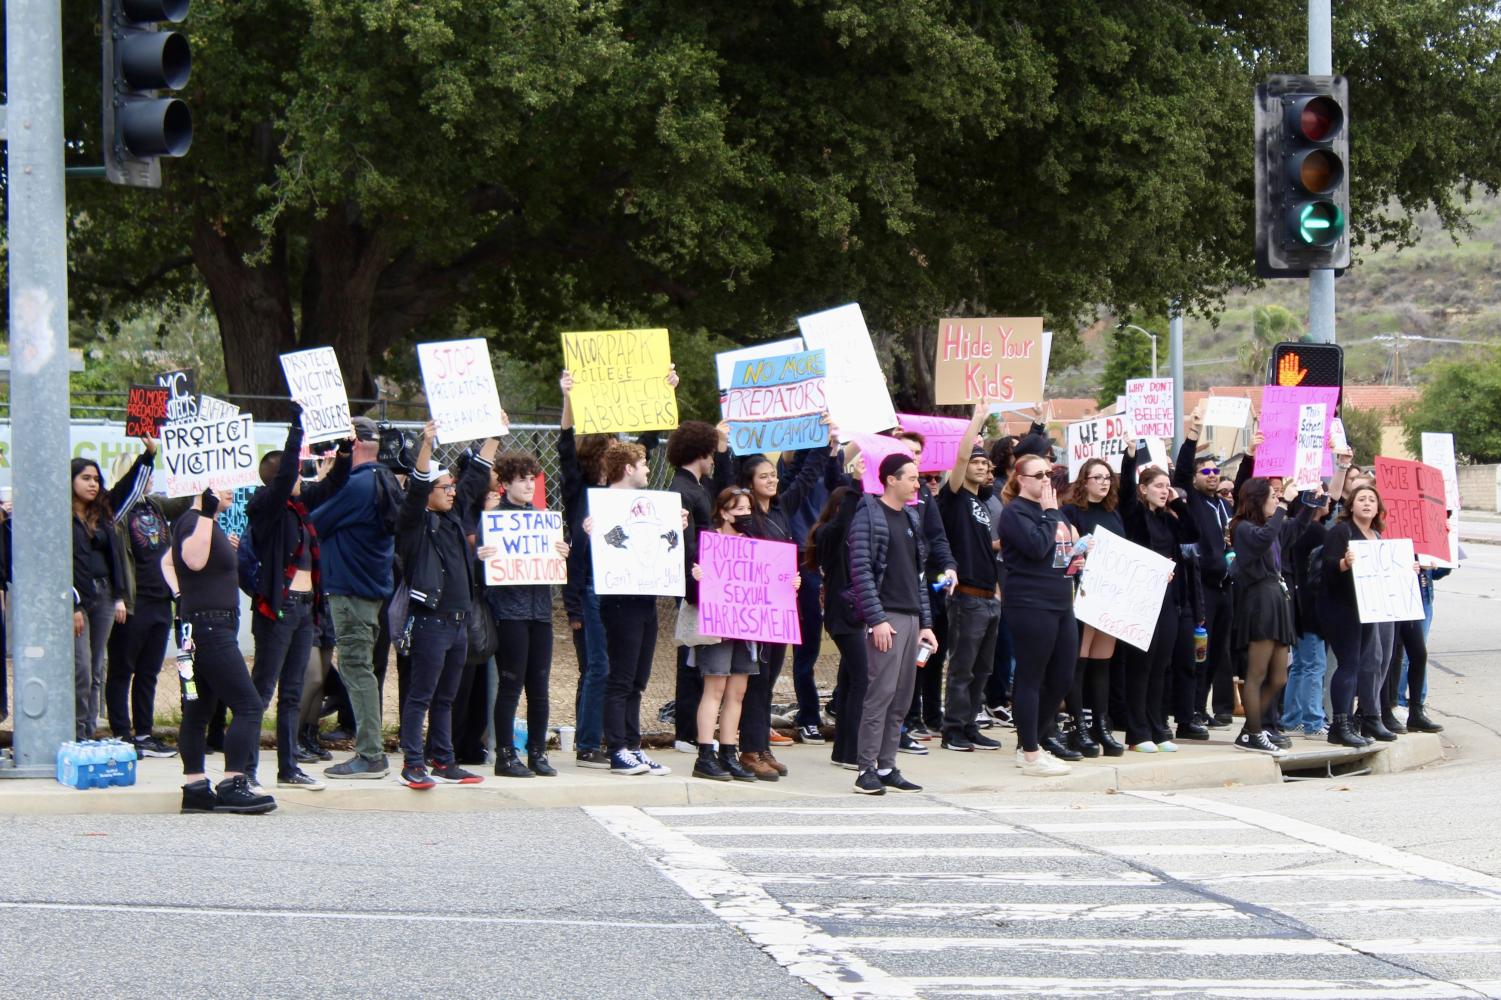 Moorpark College students and faculty marched to the busy intersection of Collins Drive and Campus Drive on Dec. 15 2022 to protest the handling of sexual misconduct on campus. Protesters were greeted by fellow students and community members honking to show their support.